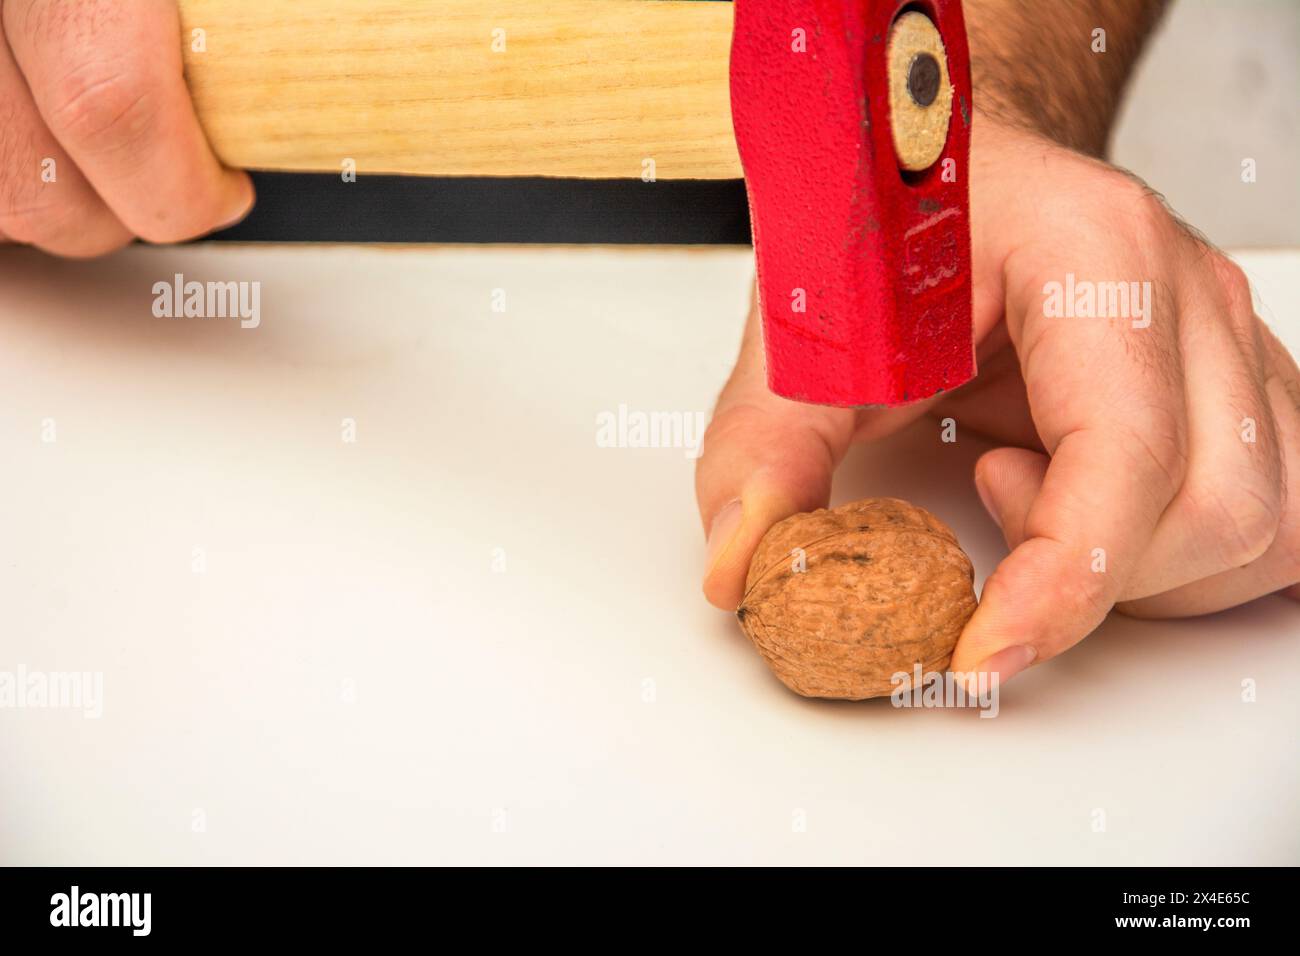 Cracking a walnut with a hammer close-up Stock Photo